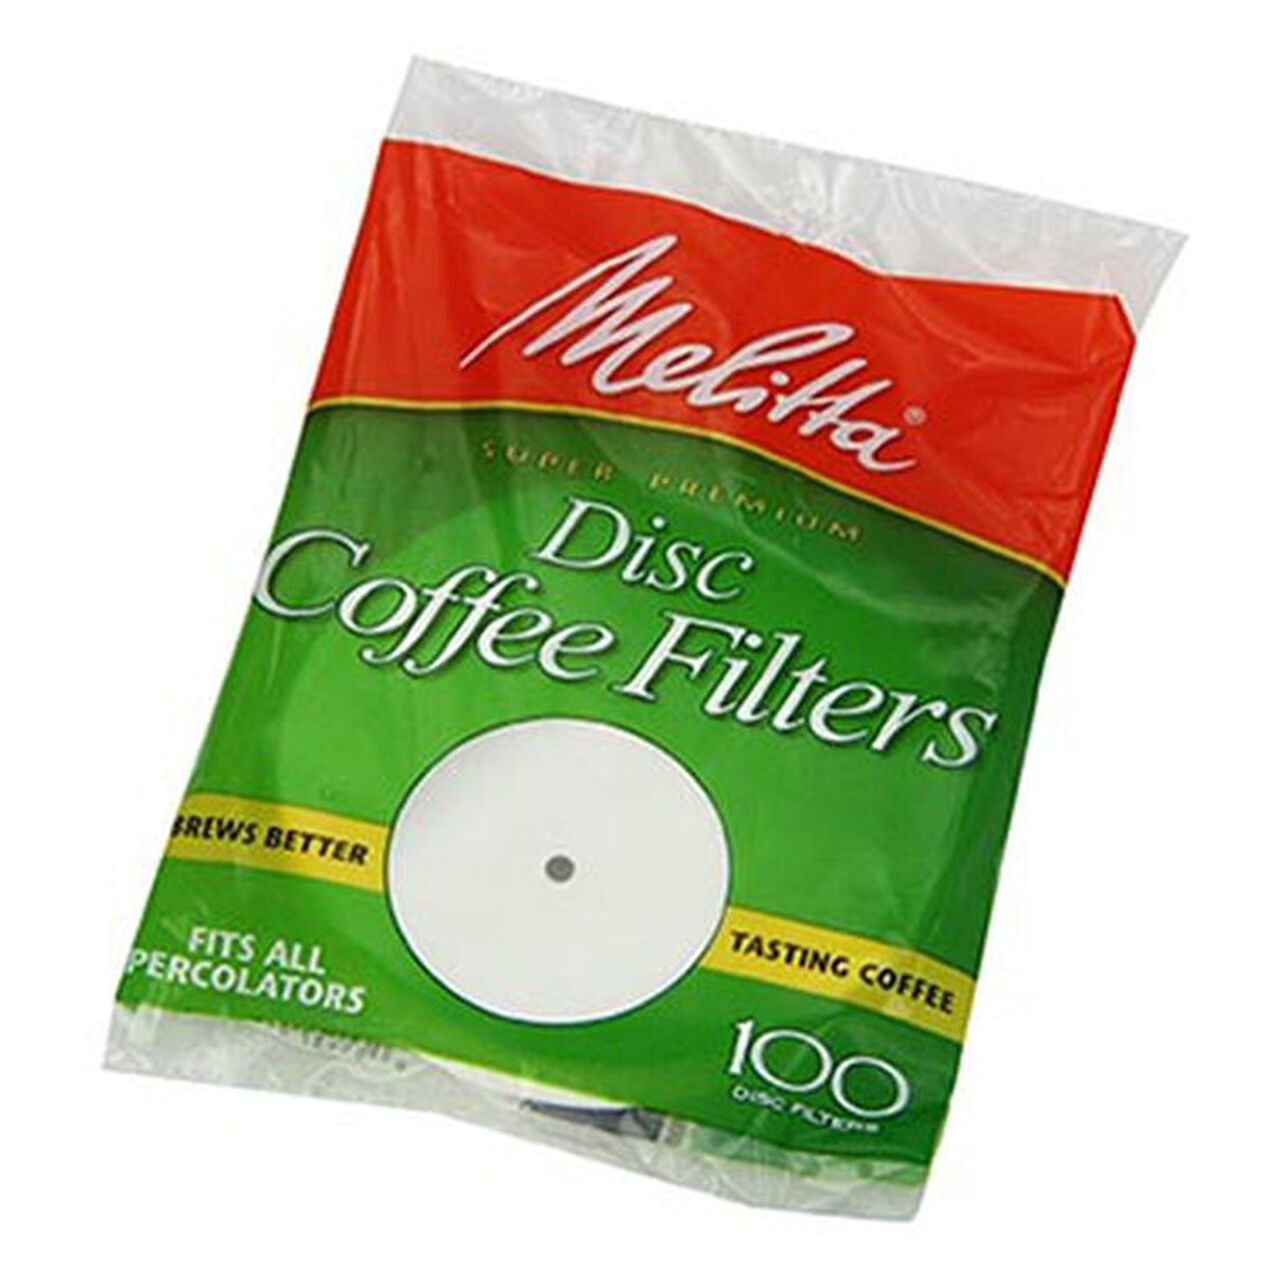 Melitta Disc Coffee Filters - (100ct.), , large image number 0